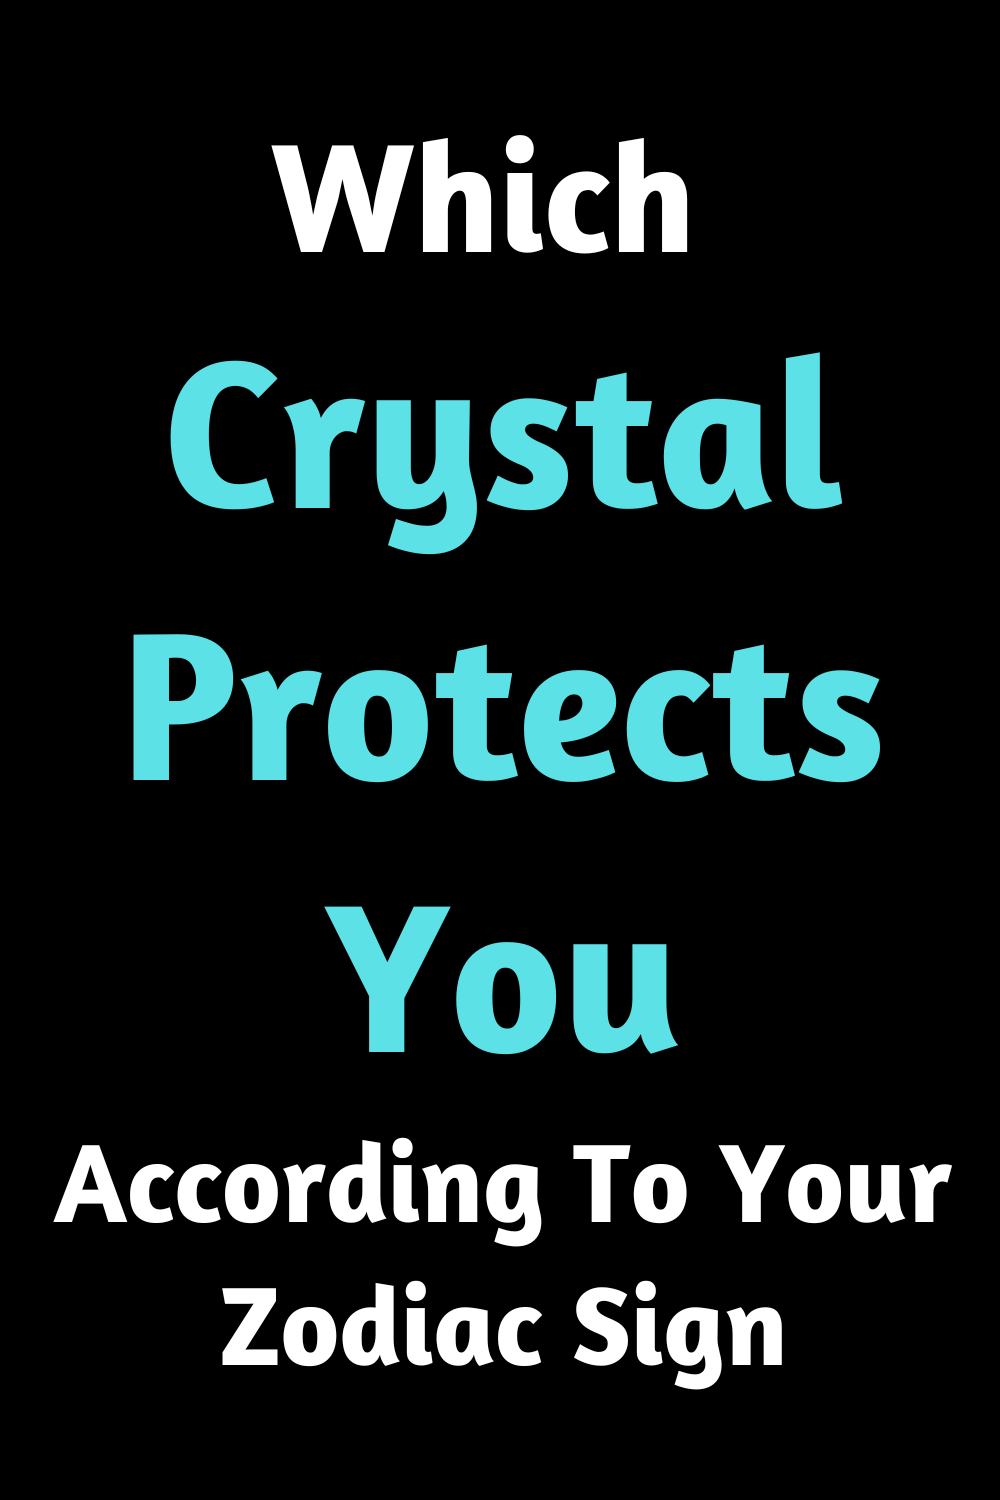 Which Crystal Protects You According To Your Zodiac Sign